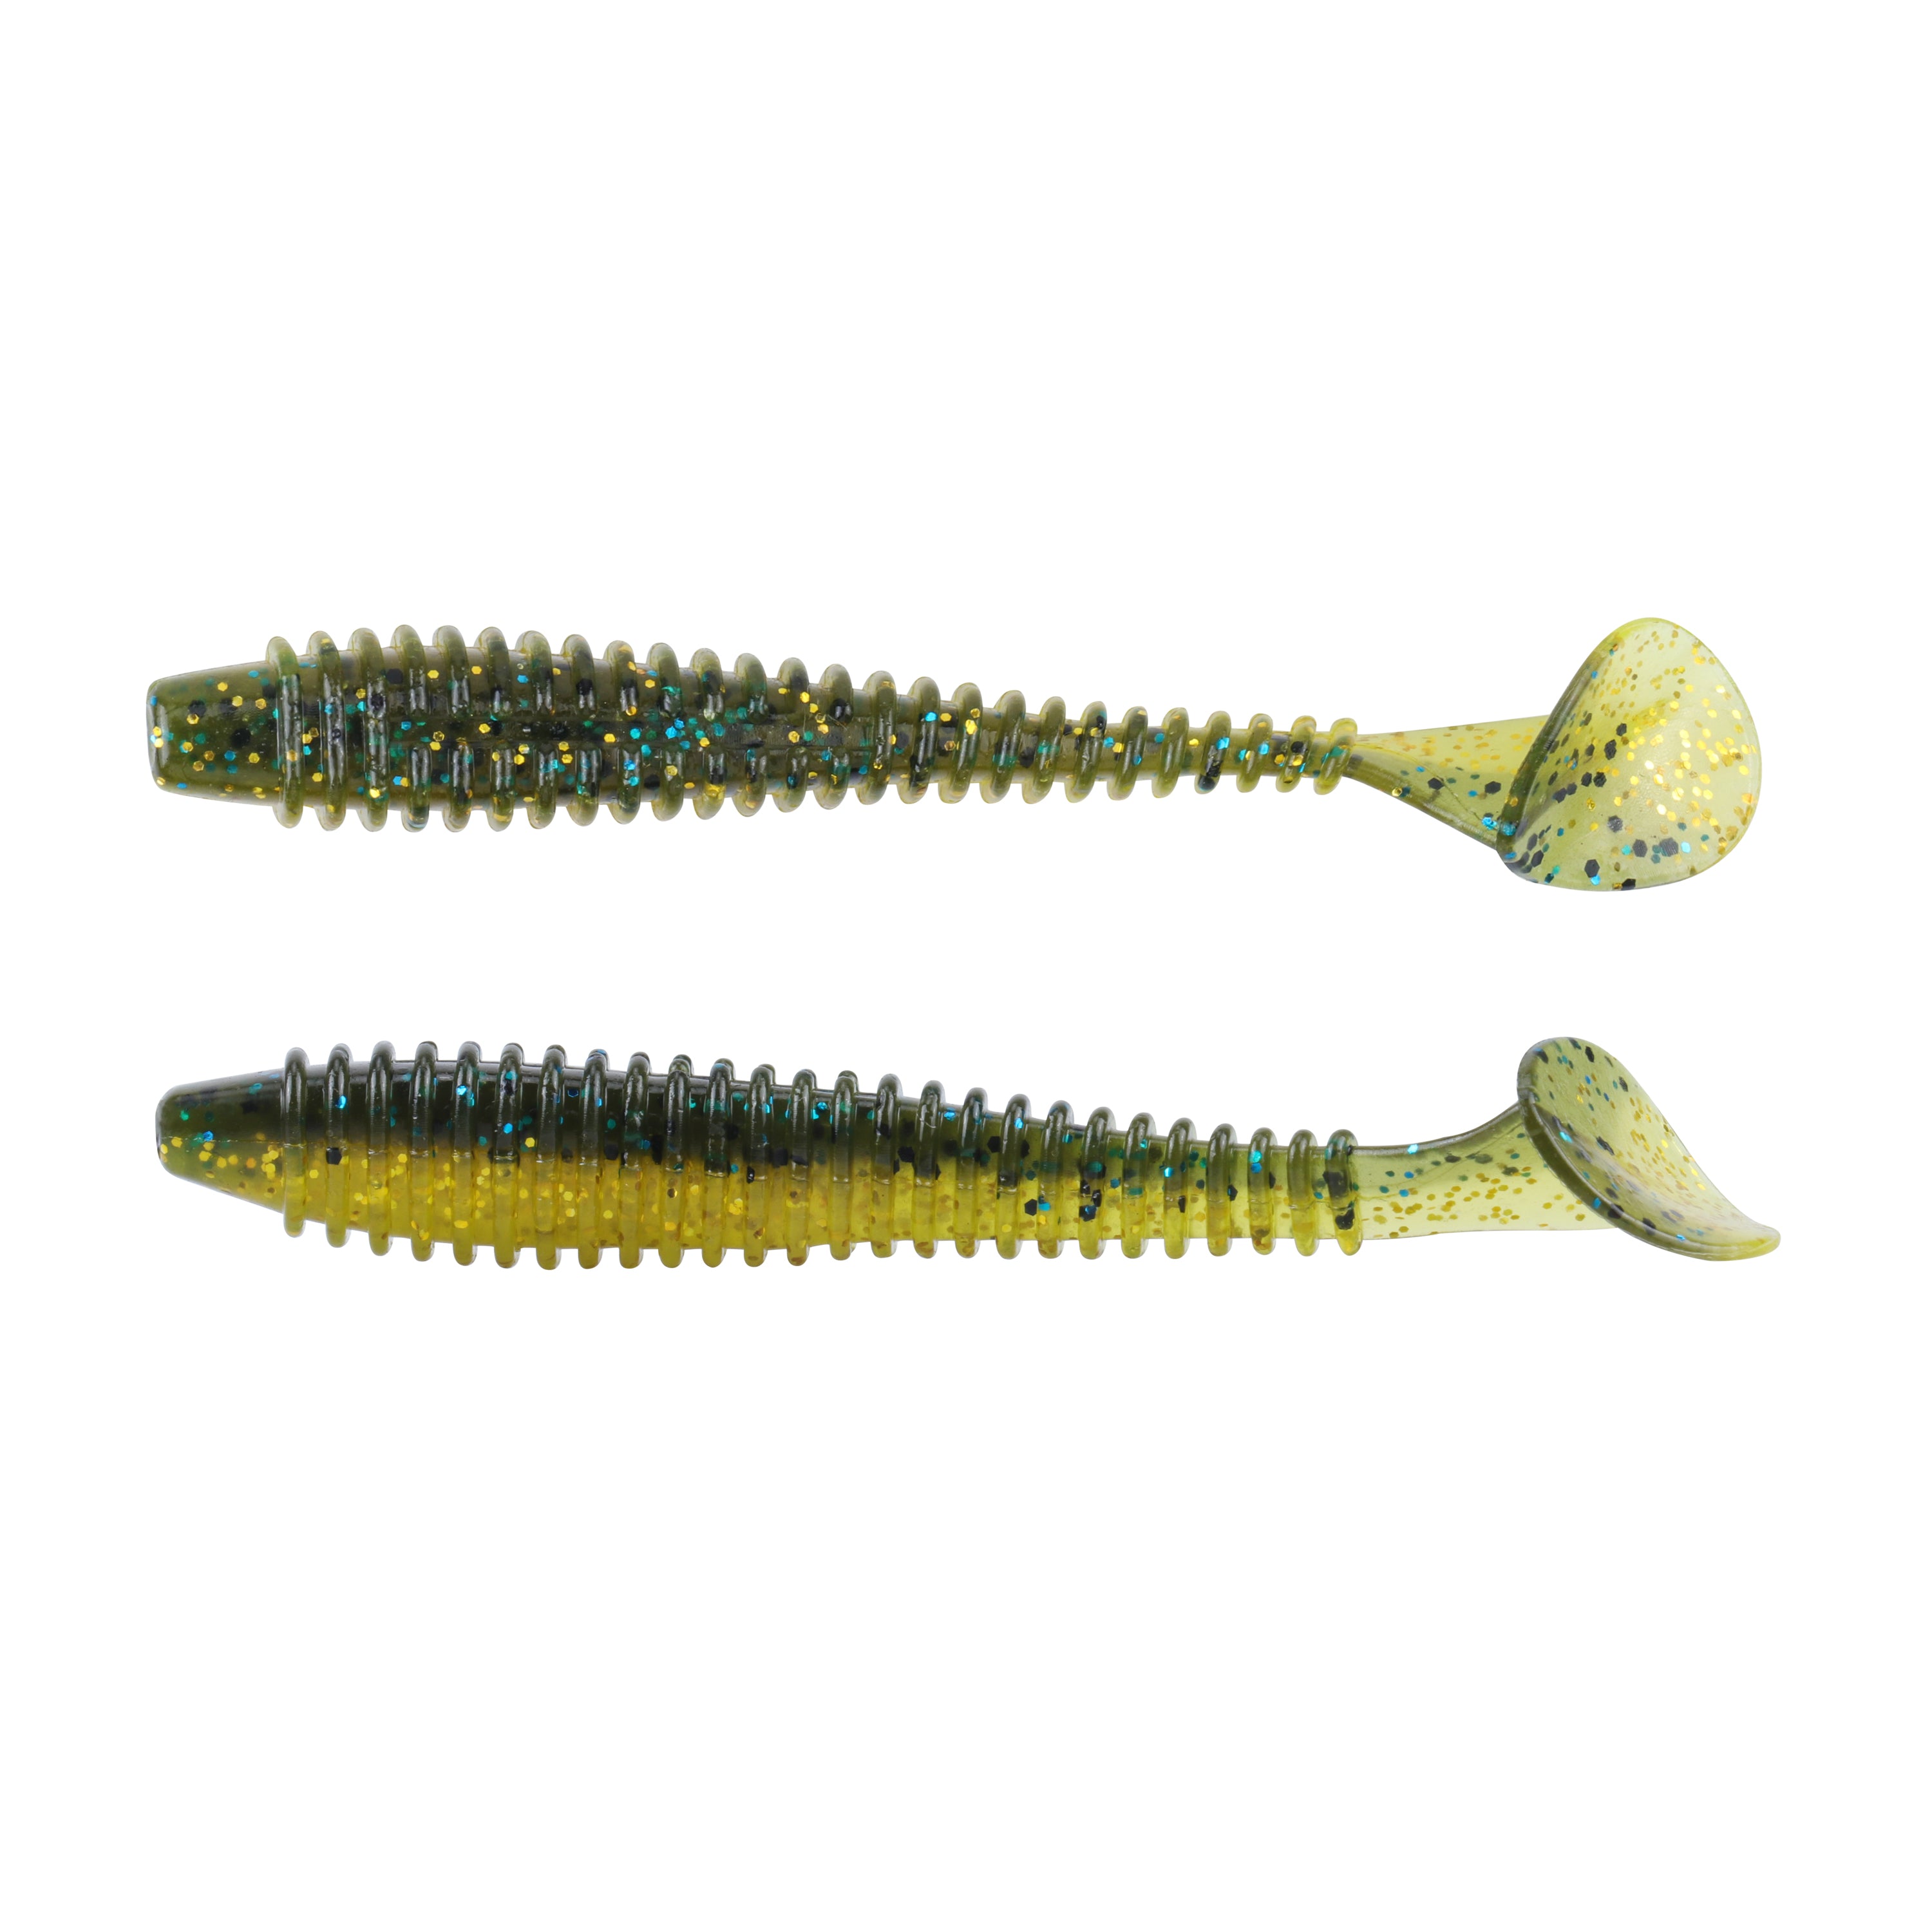 Soft Baits for Bass